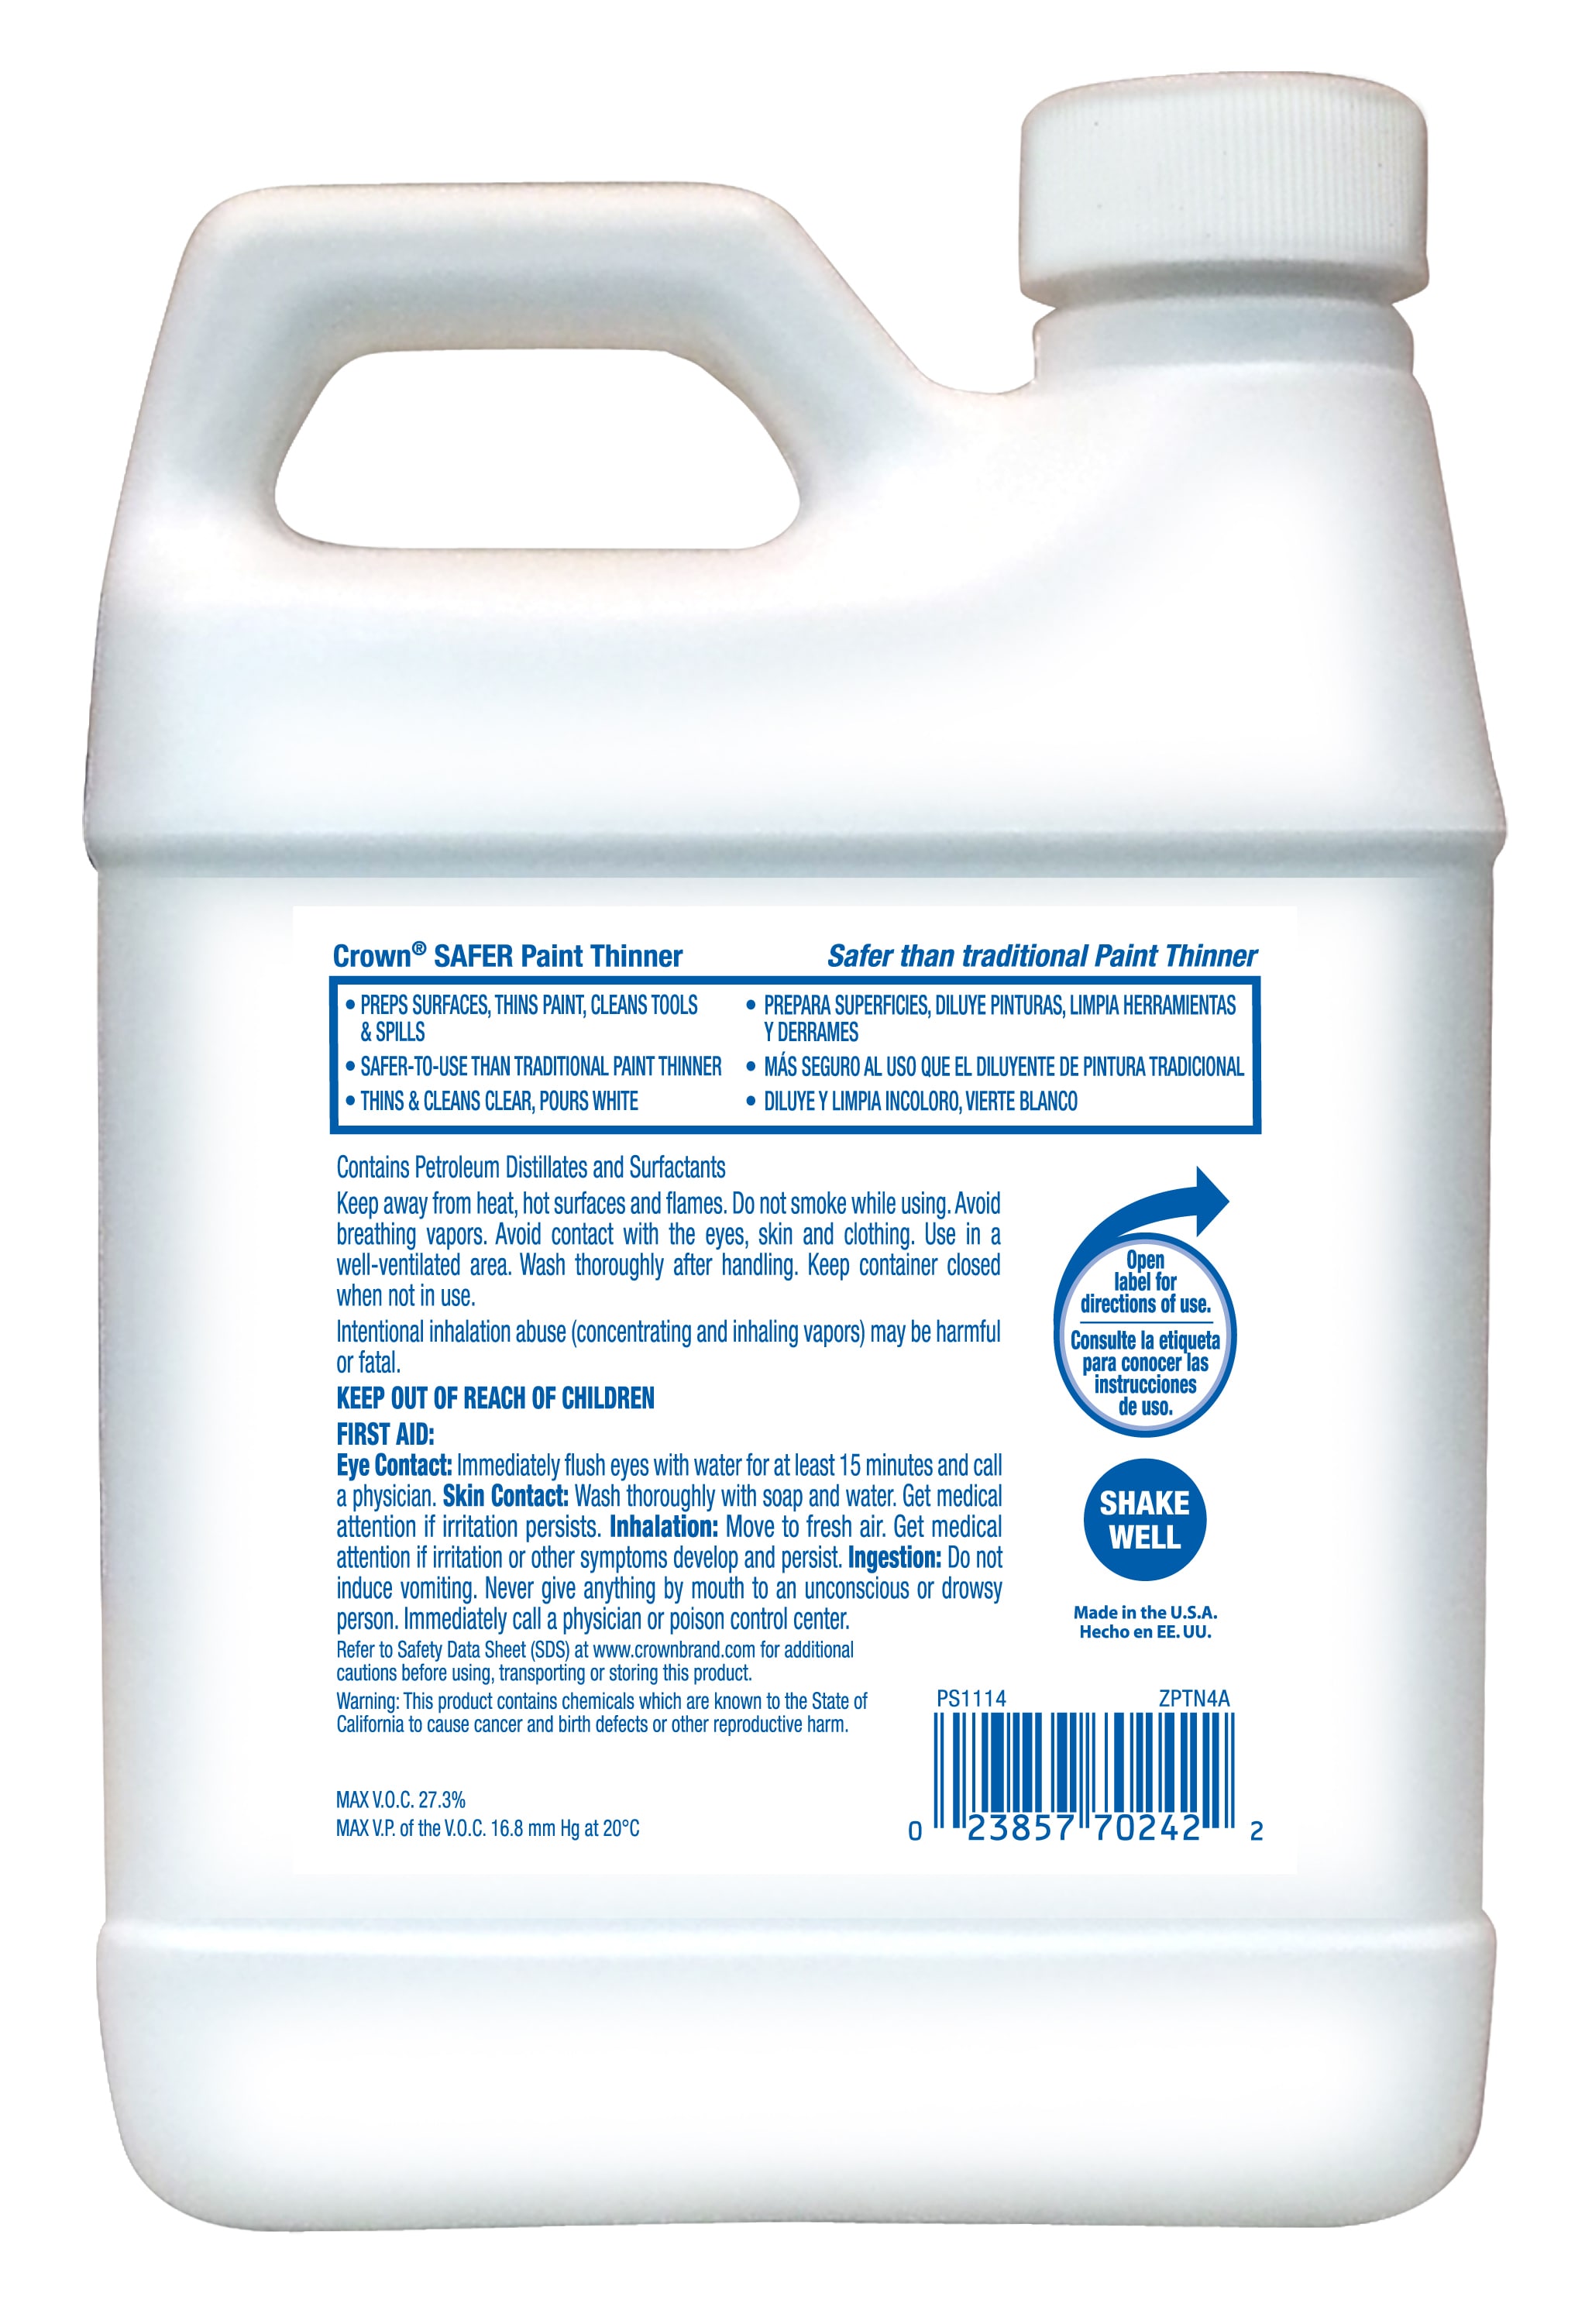 Jasco 32-fl oz Fast to Dissolve Paint Thinner in the Paint Thinners  department at